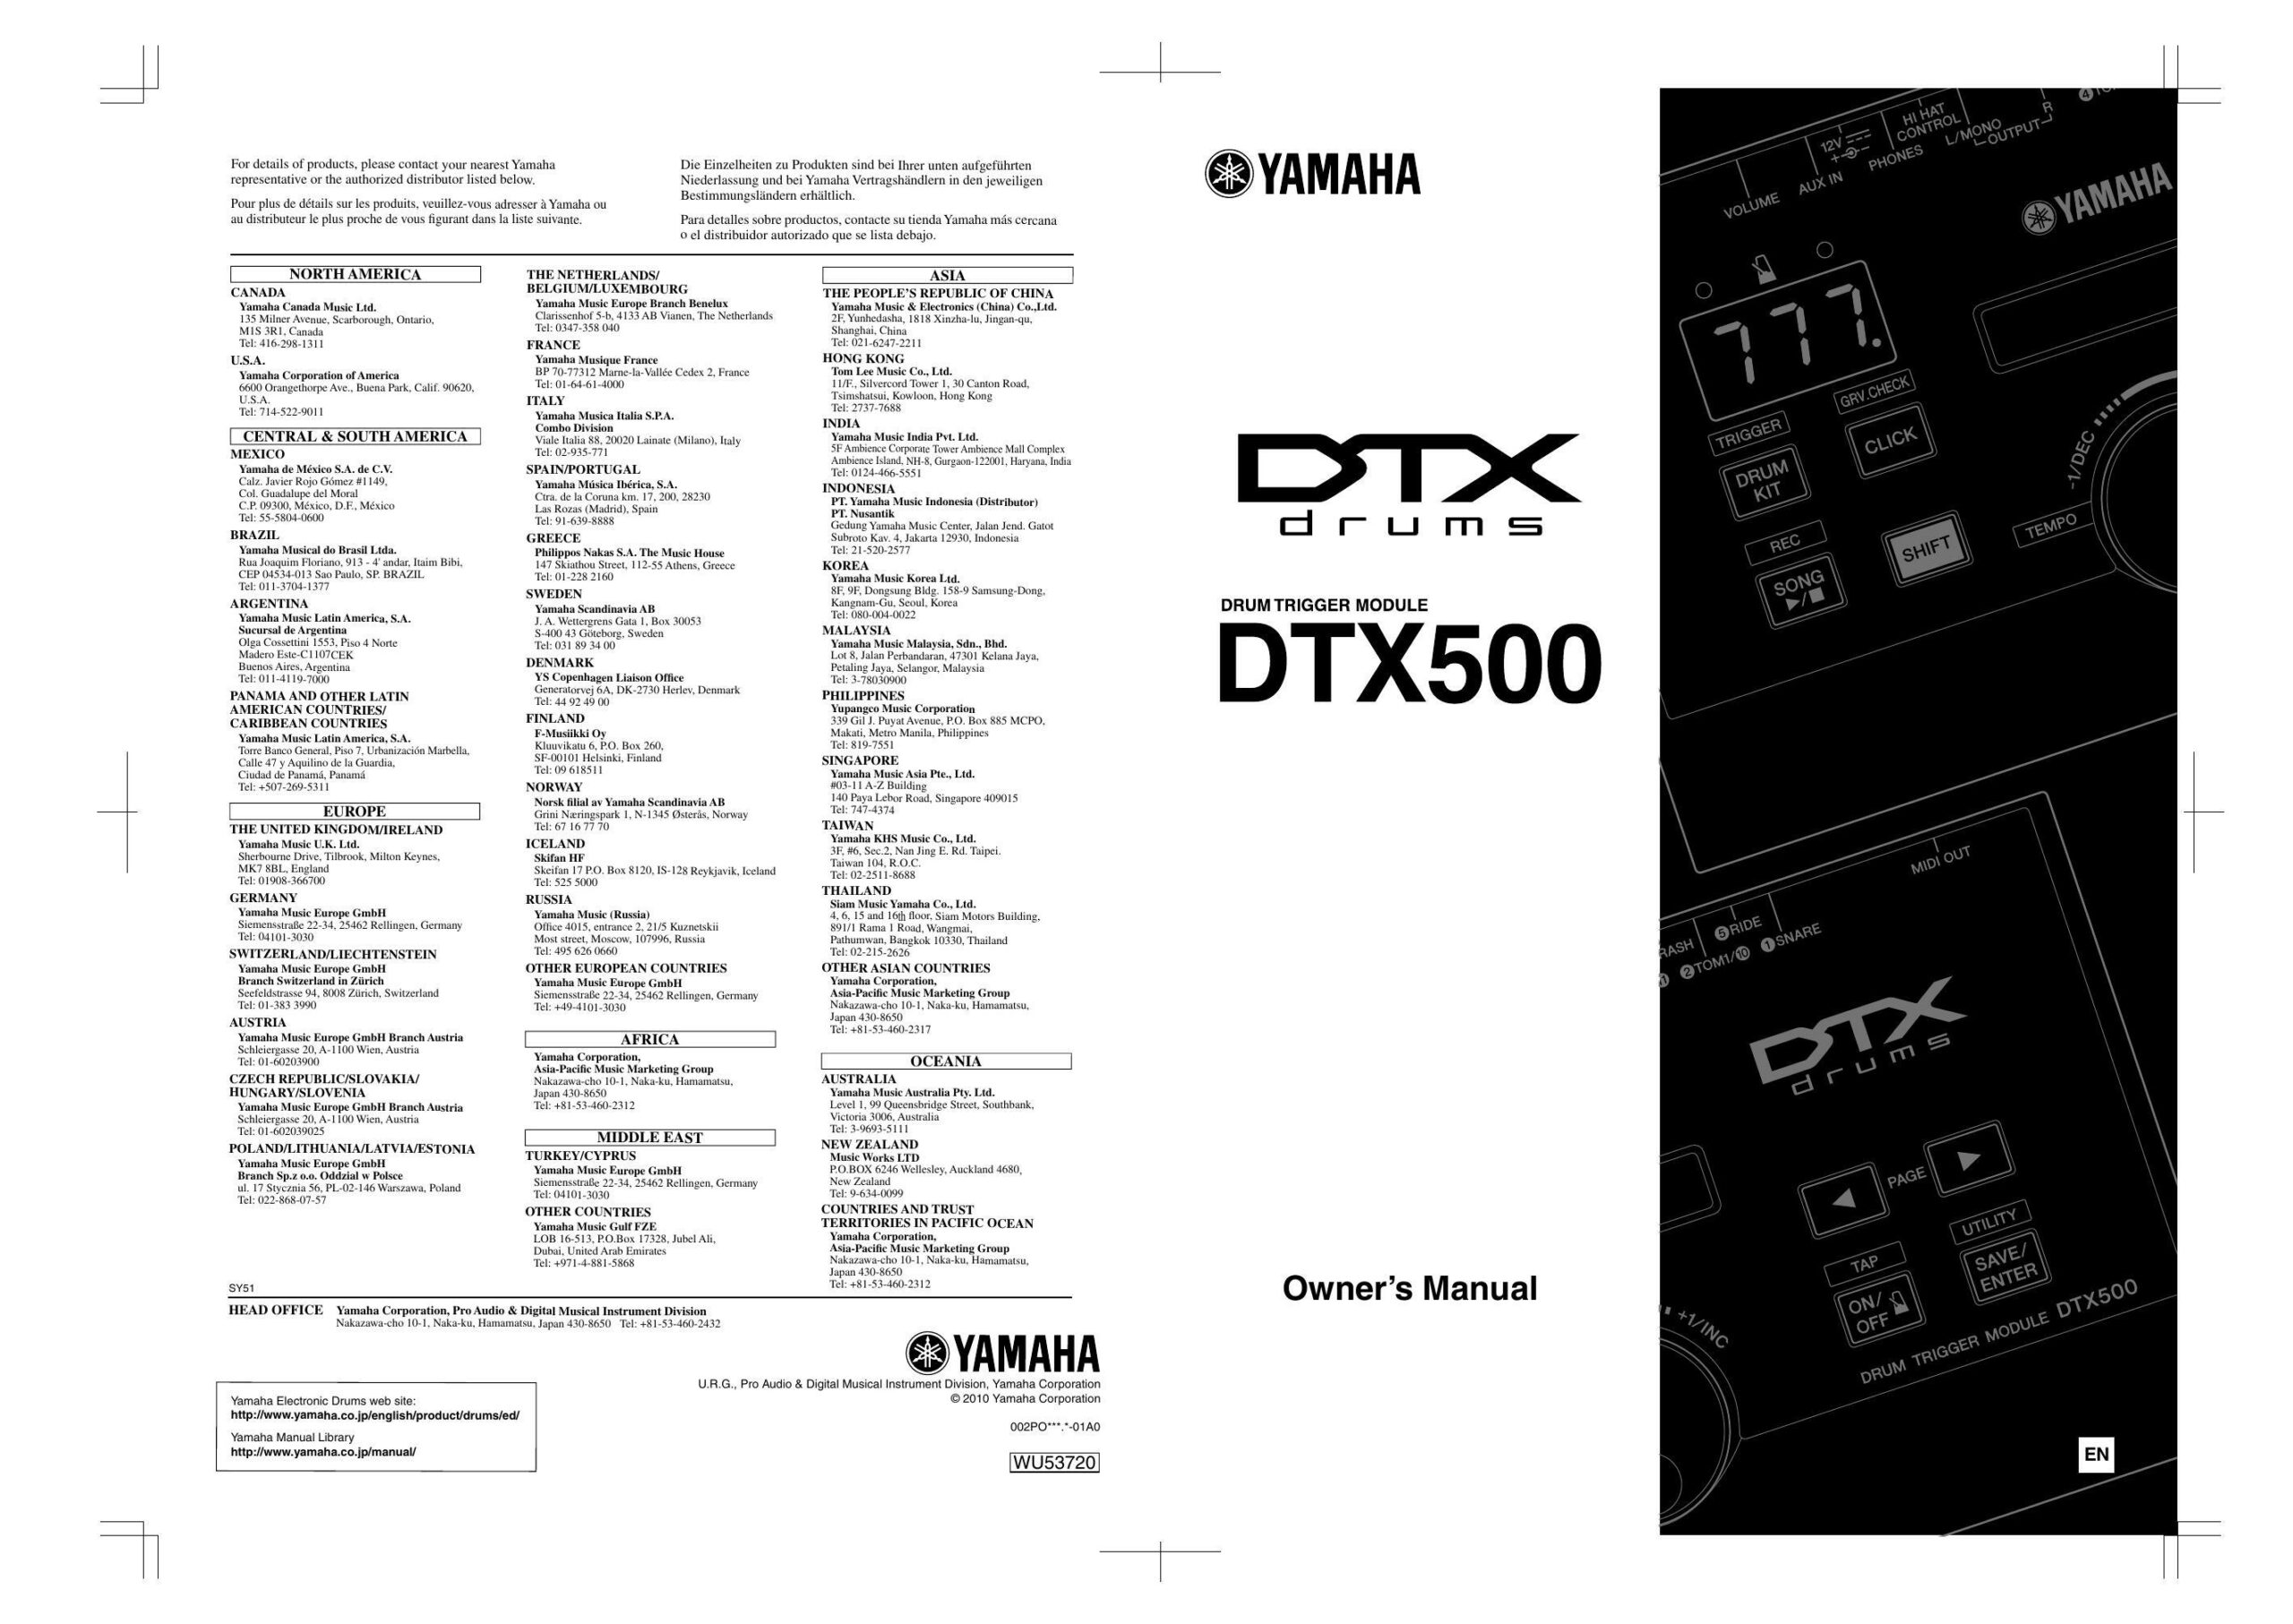 dtxsoo-owners-manual.pdf